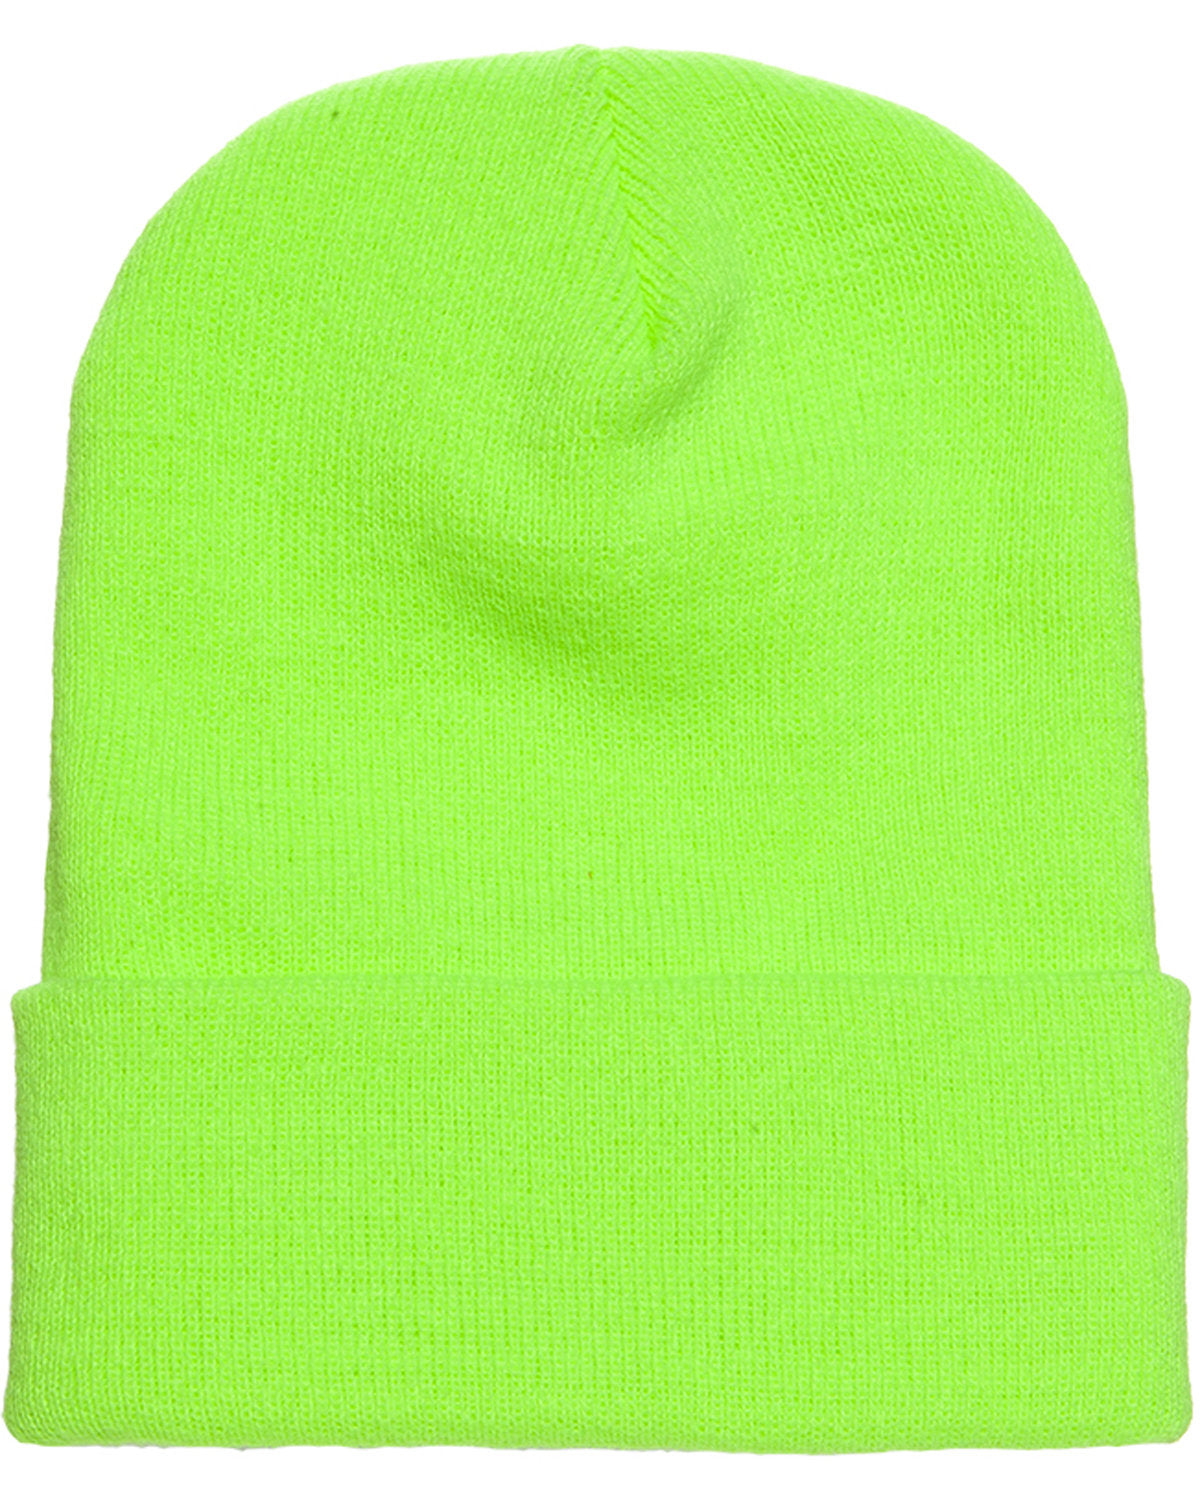 Headwear SAFETY GREEN OS Yupoong